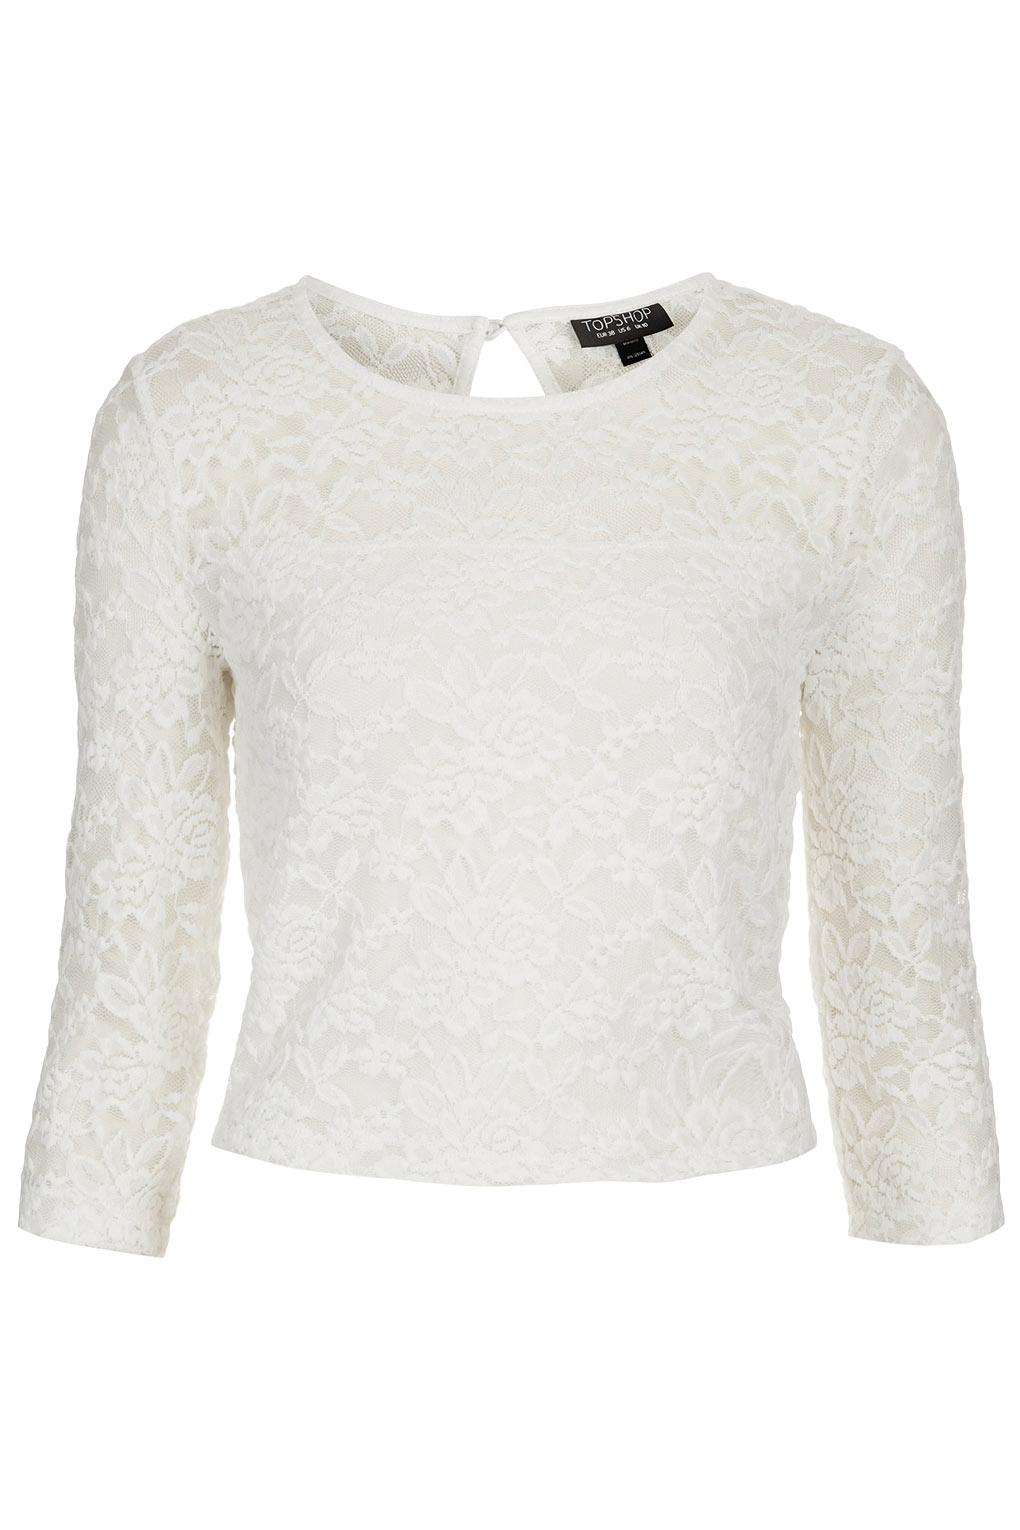 Lyst - Topshop Floral Lace Crop Top in White